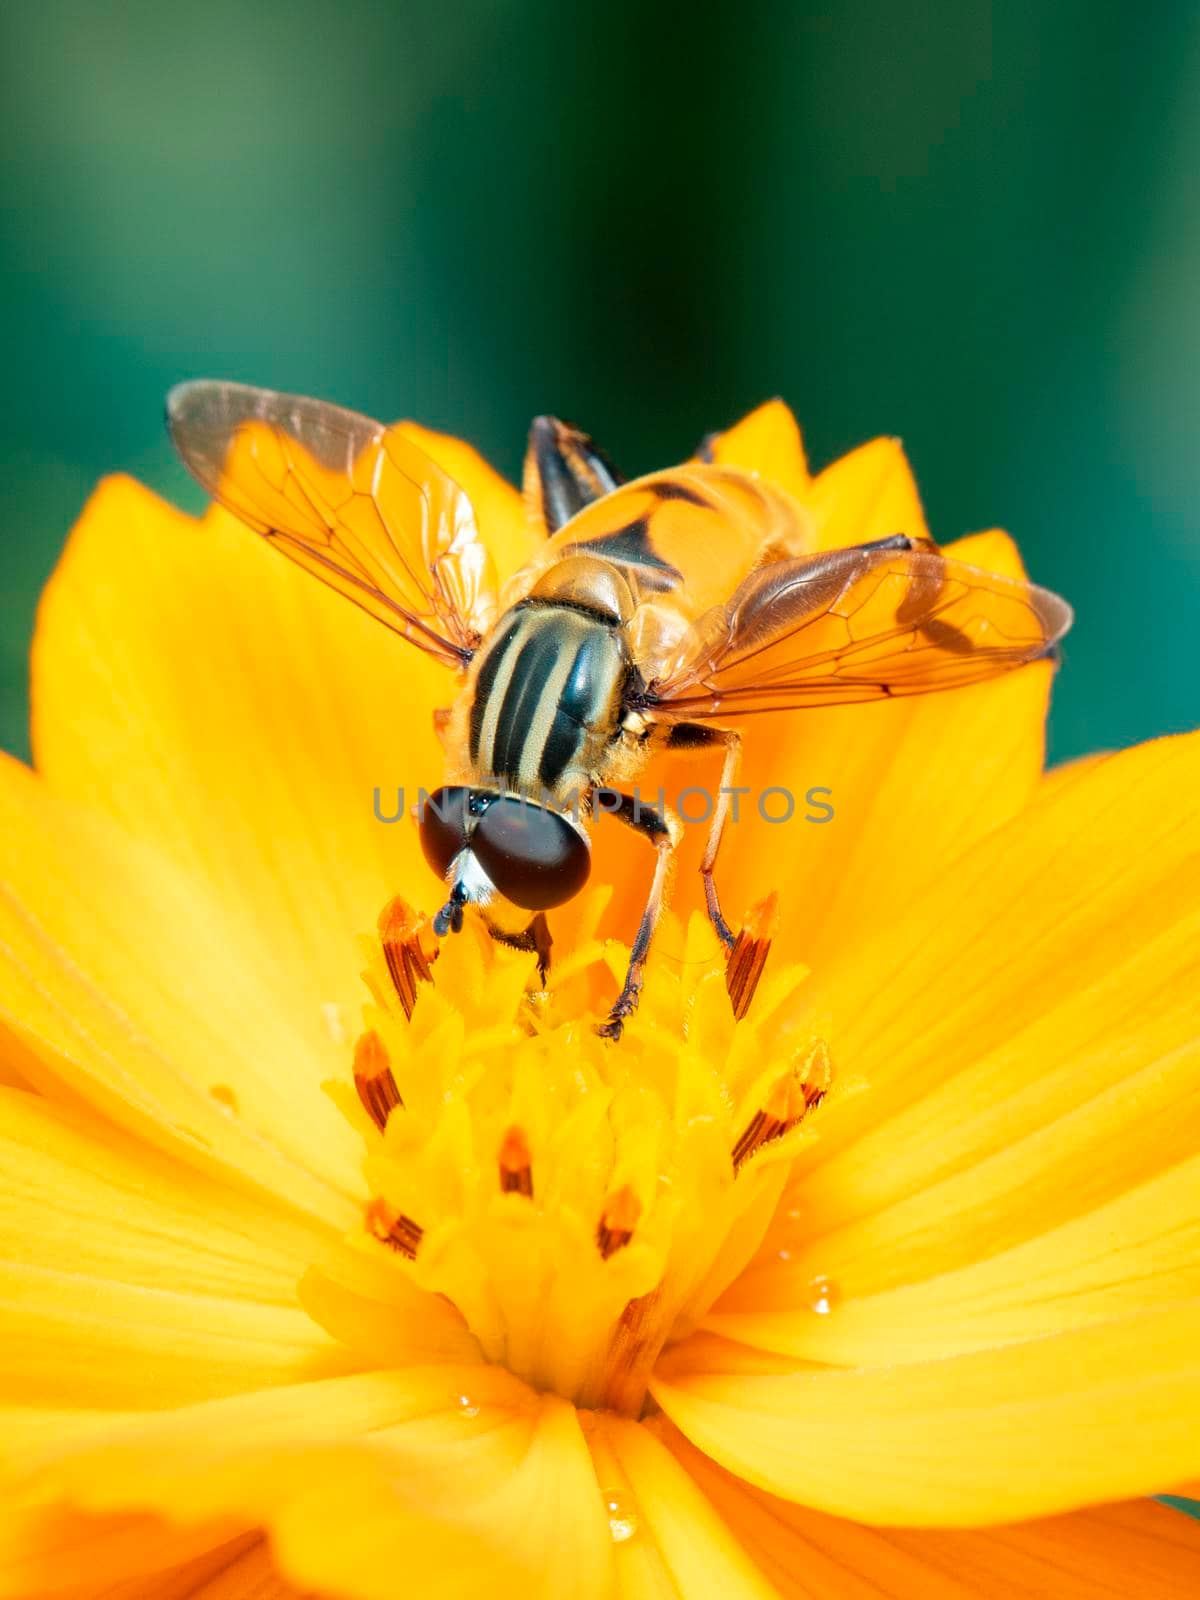 Image of flower fly or hoverfly (Helophilus insignis) on yellow flower pollen suck nectar on a natural background. Insect. Animal. by yod67